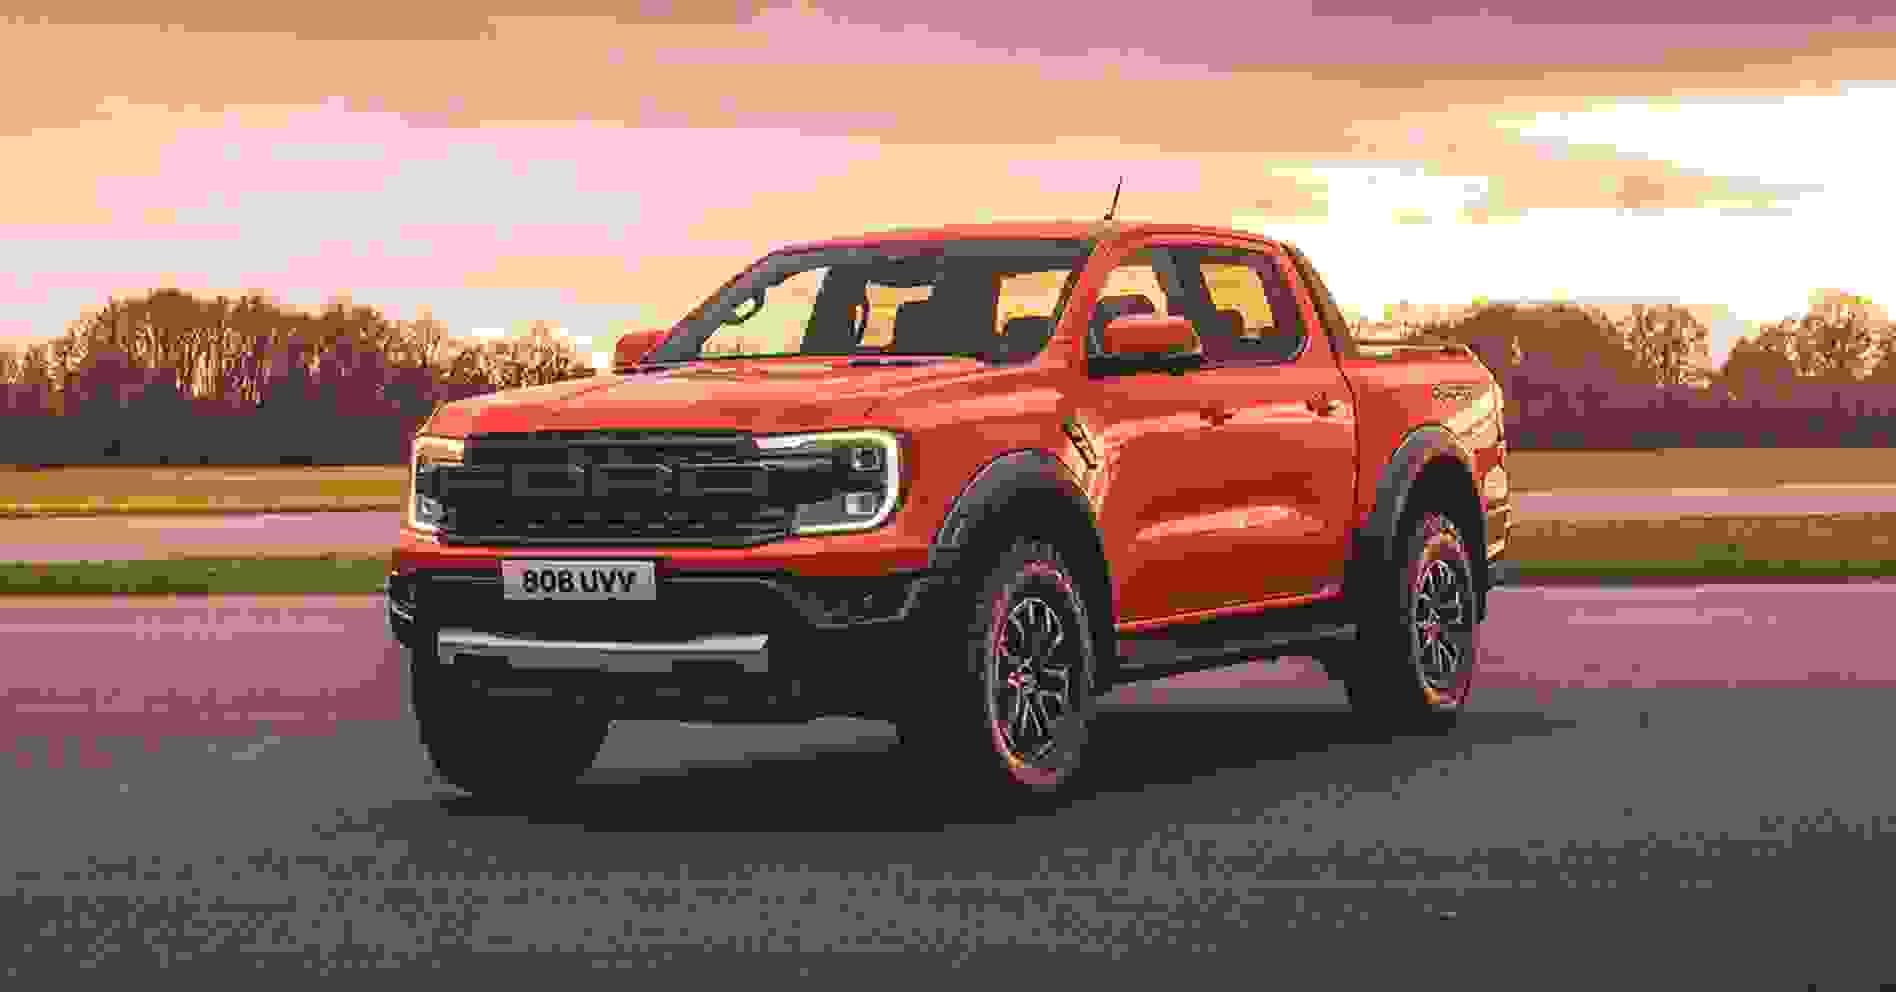 Side view of the Ford Ranger Raptor from £20,329.64